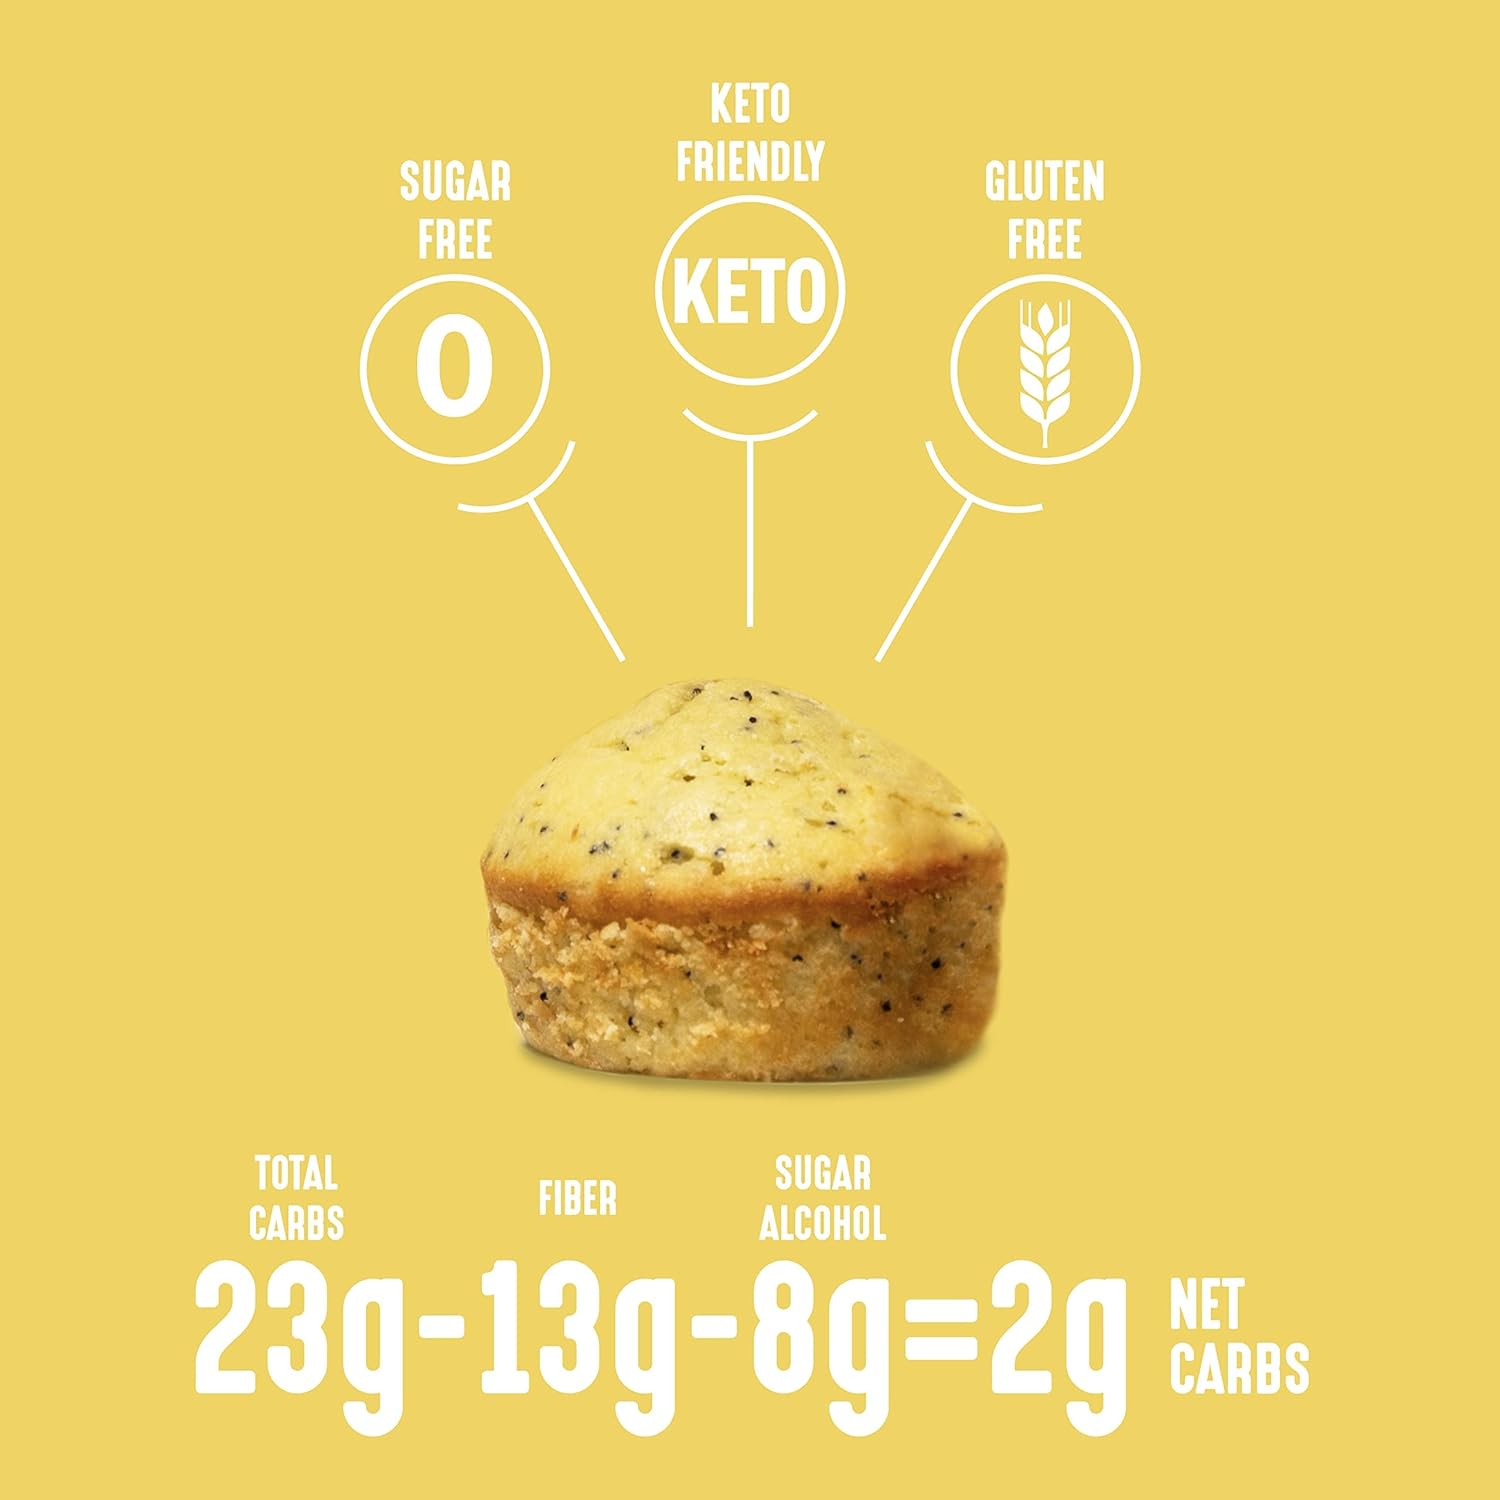 Lakanto Sugar Free Lemon Poppy Seed Muffin Mix - Sweetened with Monk Fruit Sweetener, 2g Net Carbs, Dairy Free, Keto Diet Friendly, Gluten Free, Natural Flavors, Almond Flour, Sea Salt (12 Muffins) : Grocery & Gourmet Food